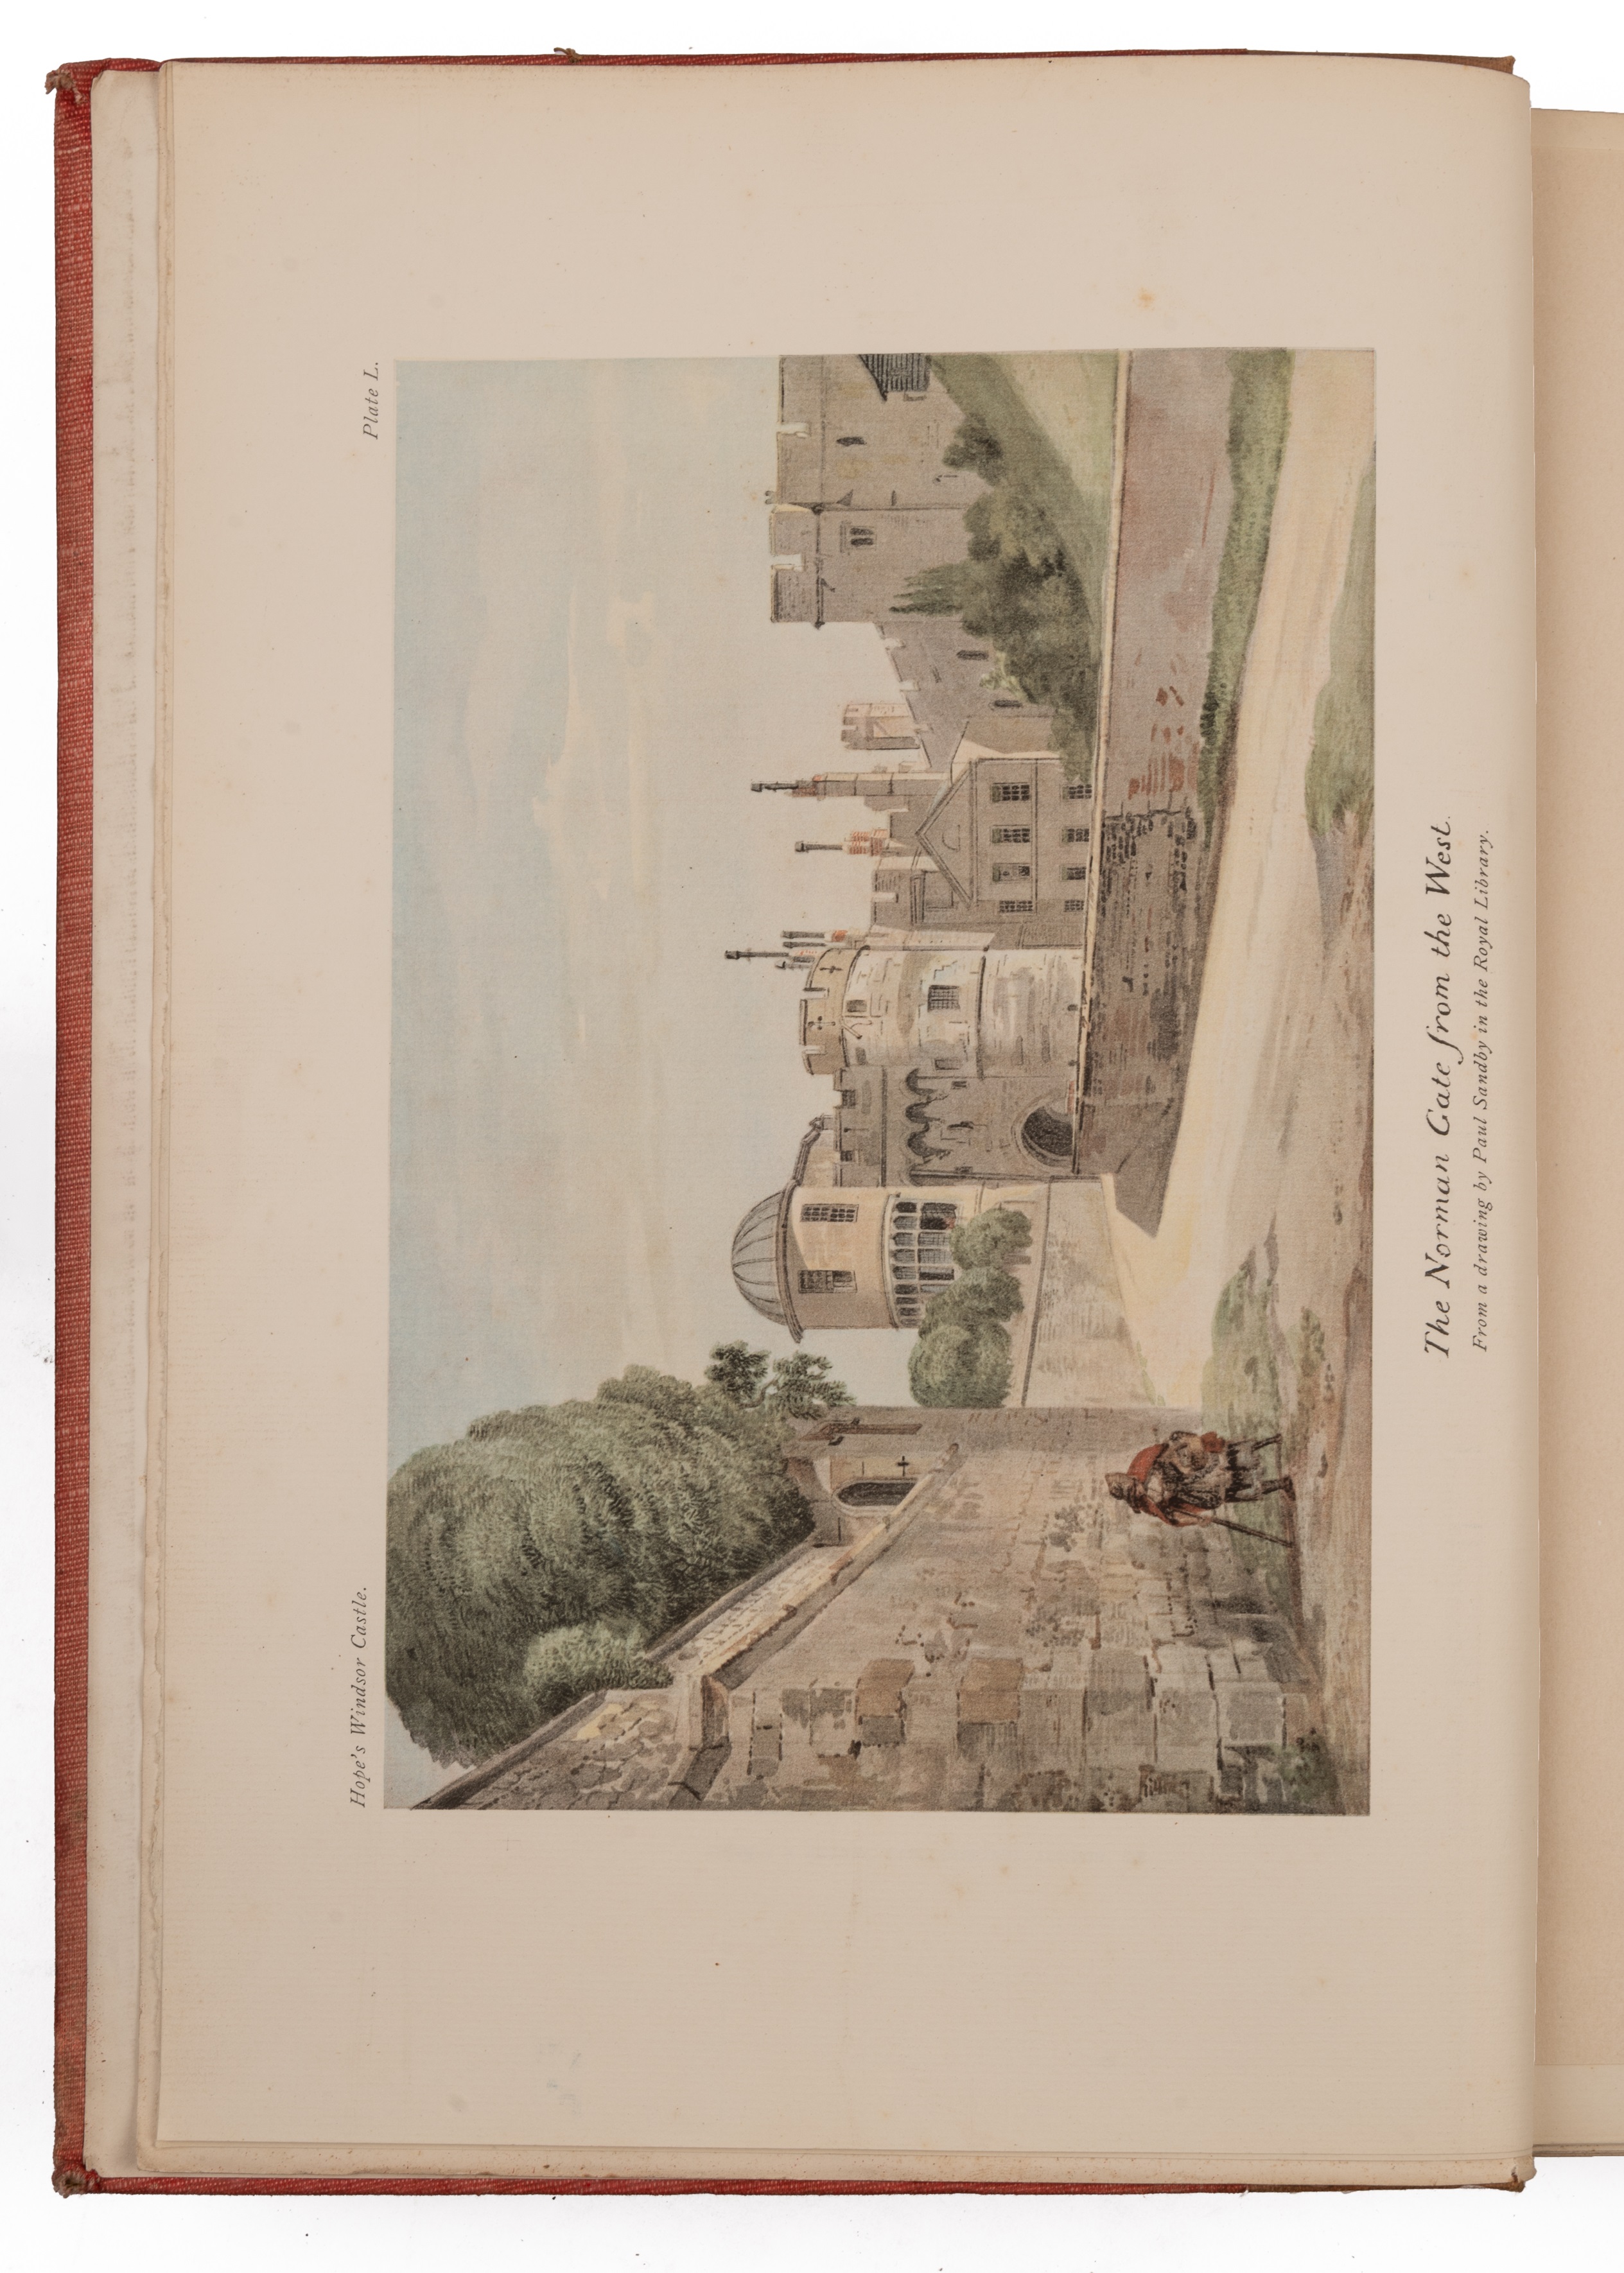 St John Hope (W.H.) 'Windsor Castle, An Architectural History' Country Life, London 1913. 2 vols. - Image 3 of 9